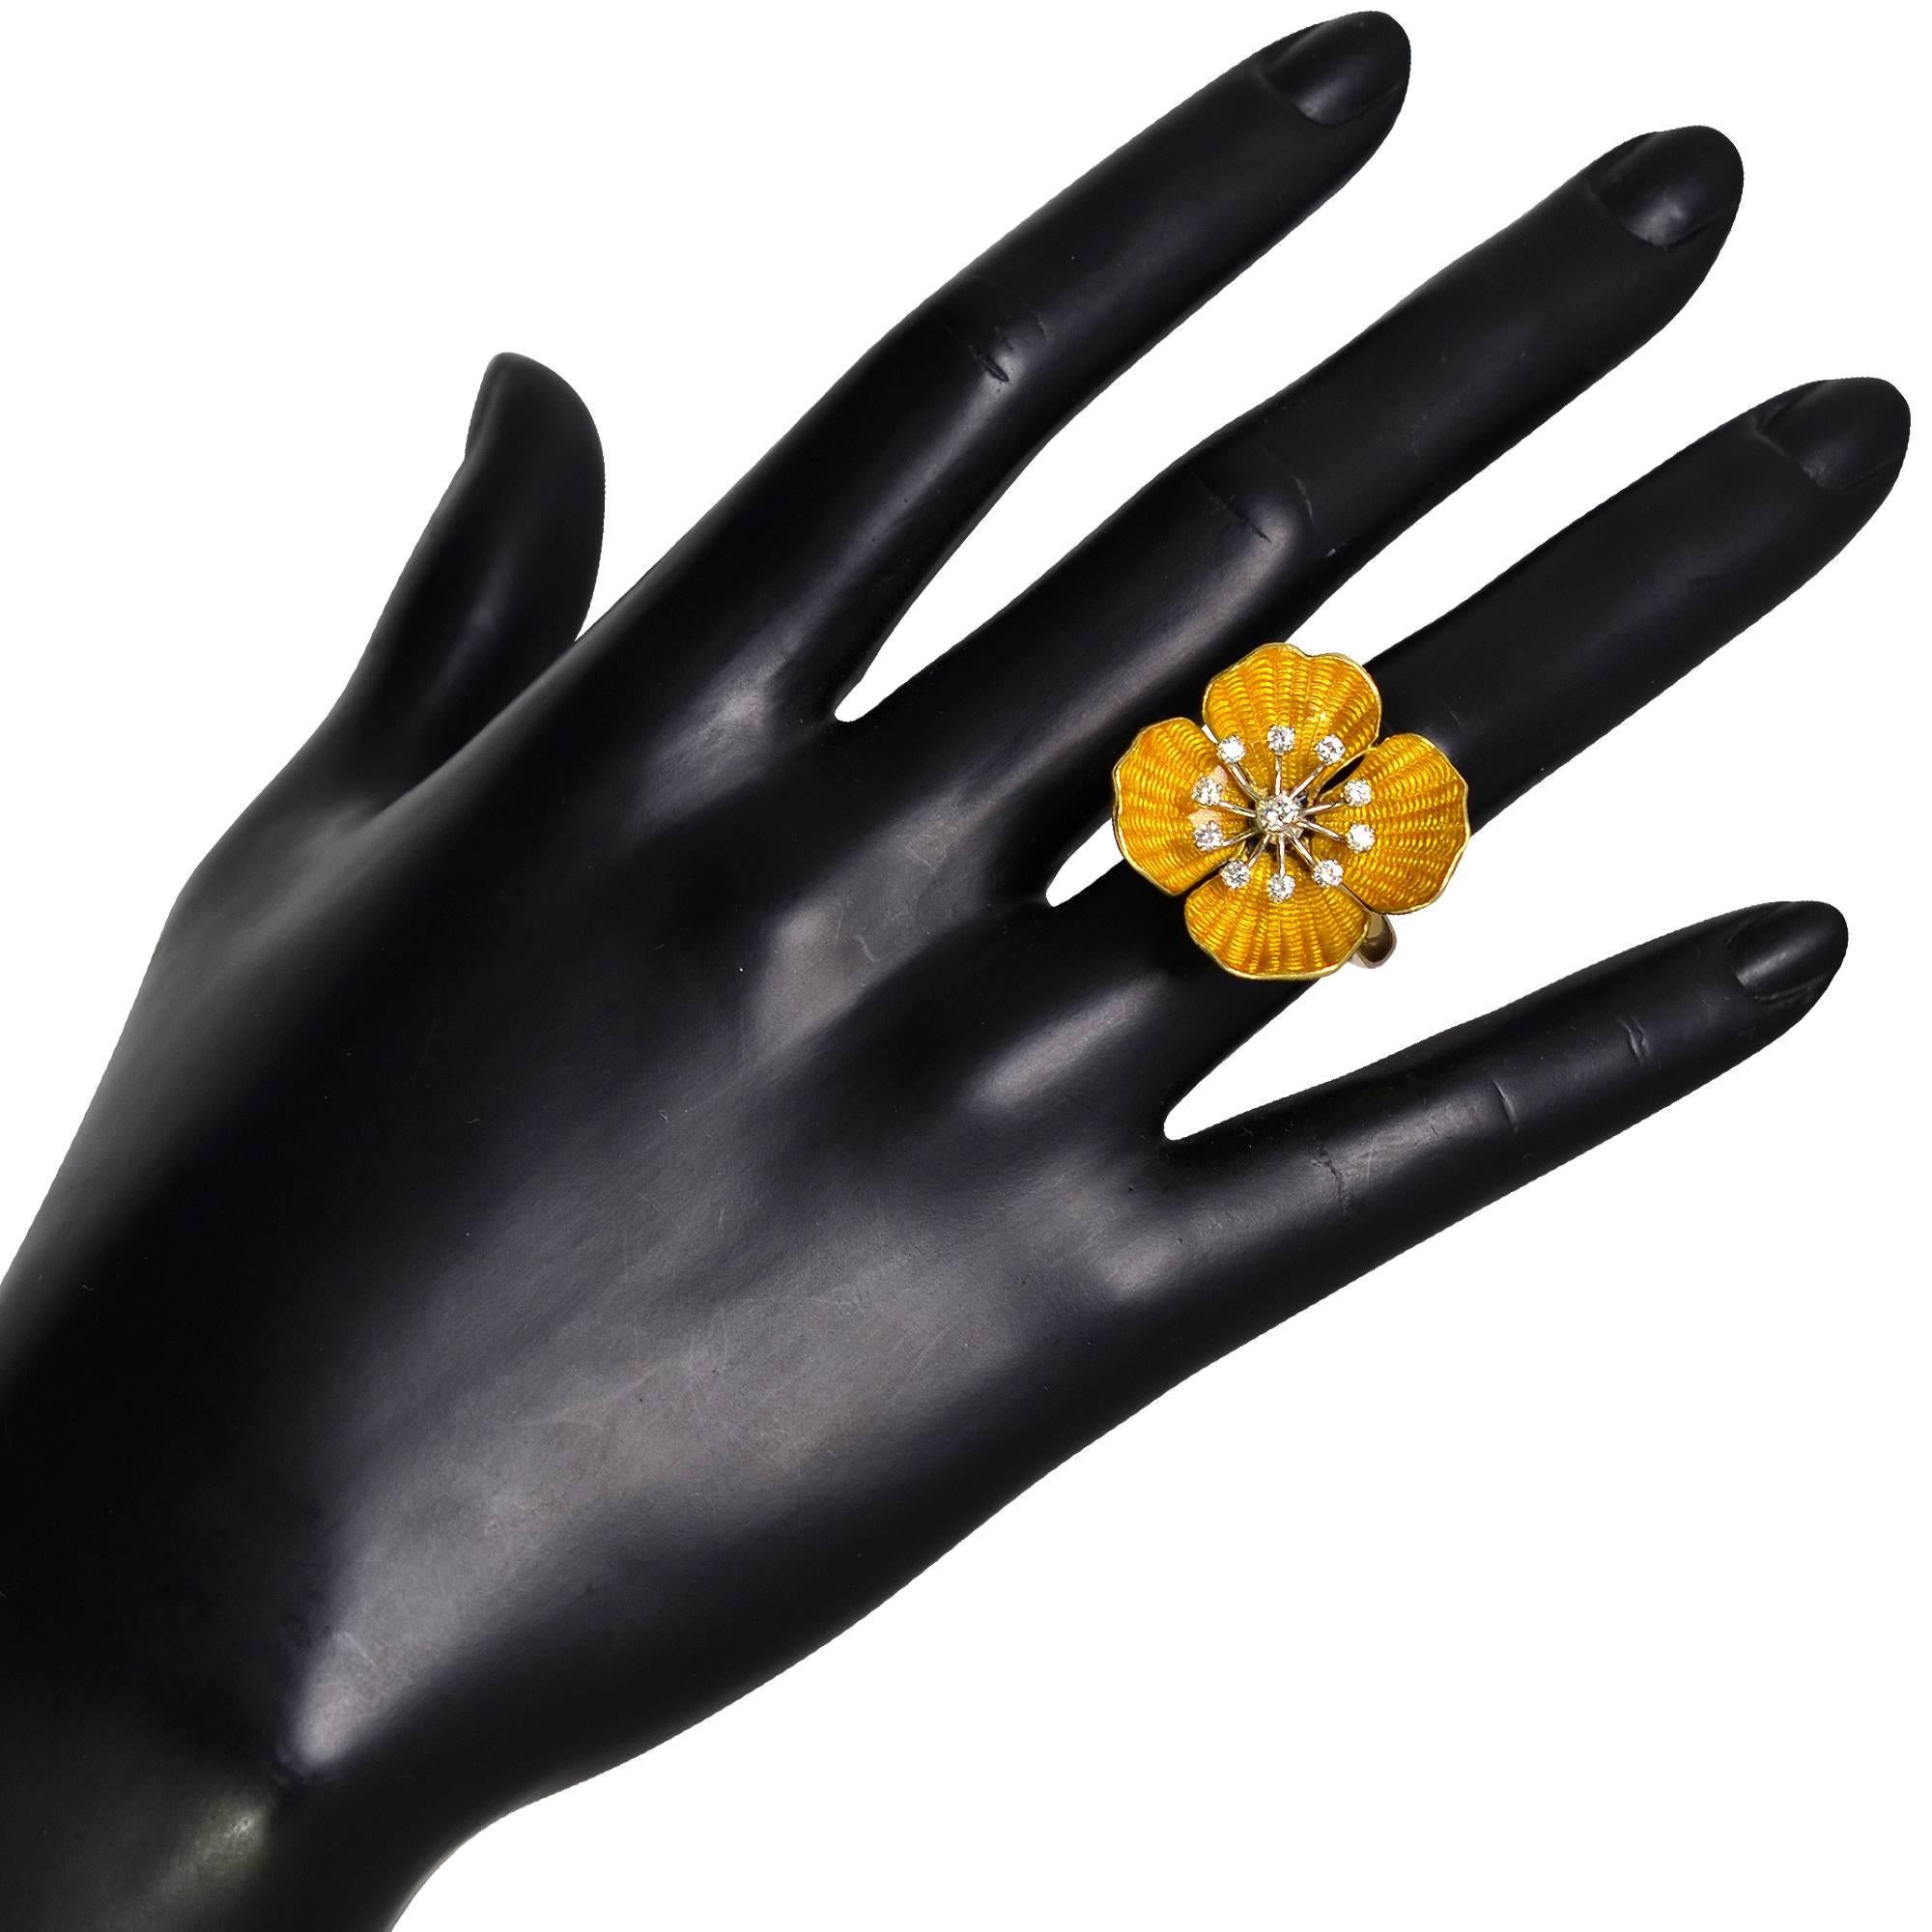 Whimsical 18K yellow gold  flower cocktail ring showcasing 11 round brilliant cut diamonds weighing approximately .50cts F-G color and VS1-2 clarity surrounded by 4 gold petals adorned with vibrant orangey yellow enamel. The ring is currently a size